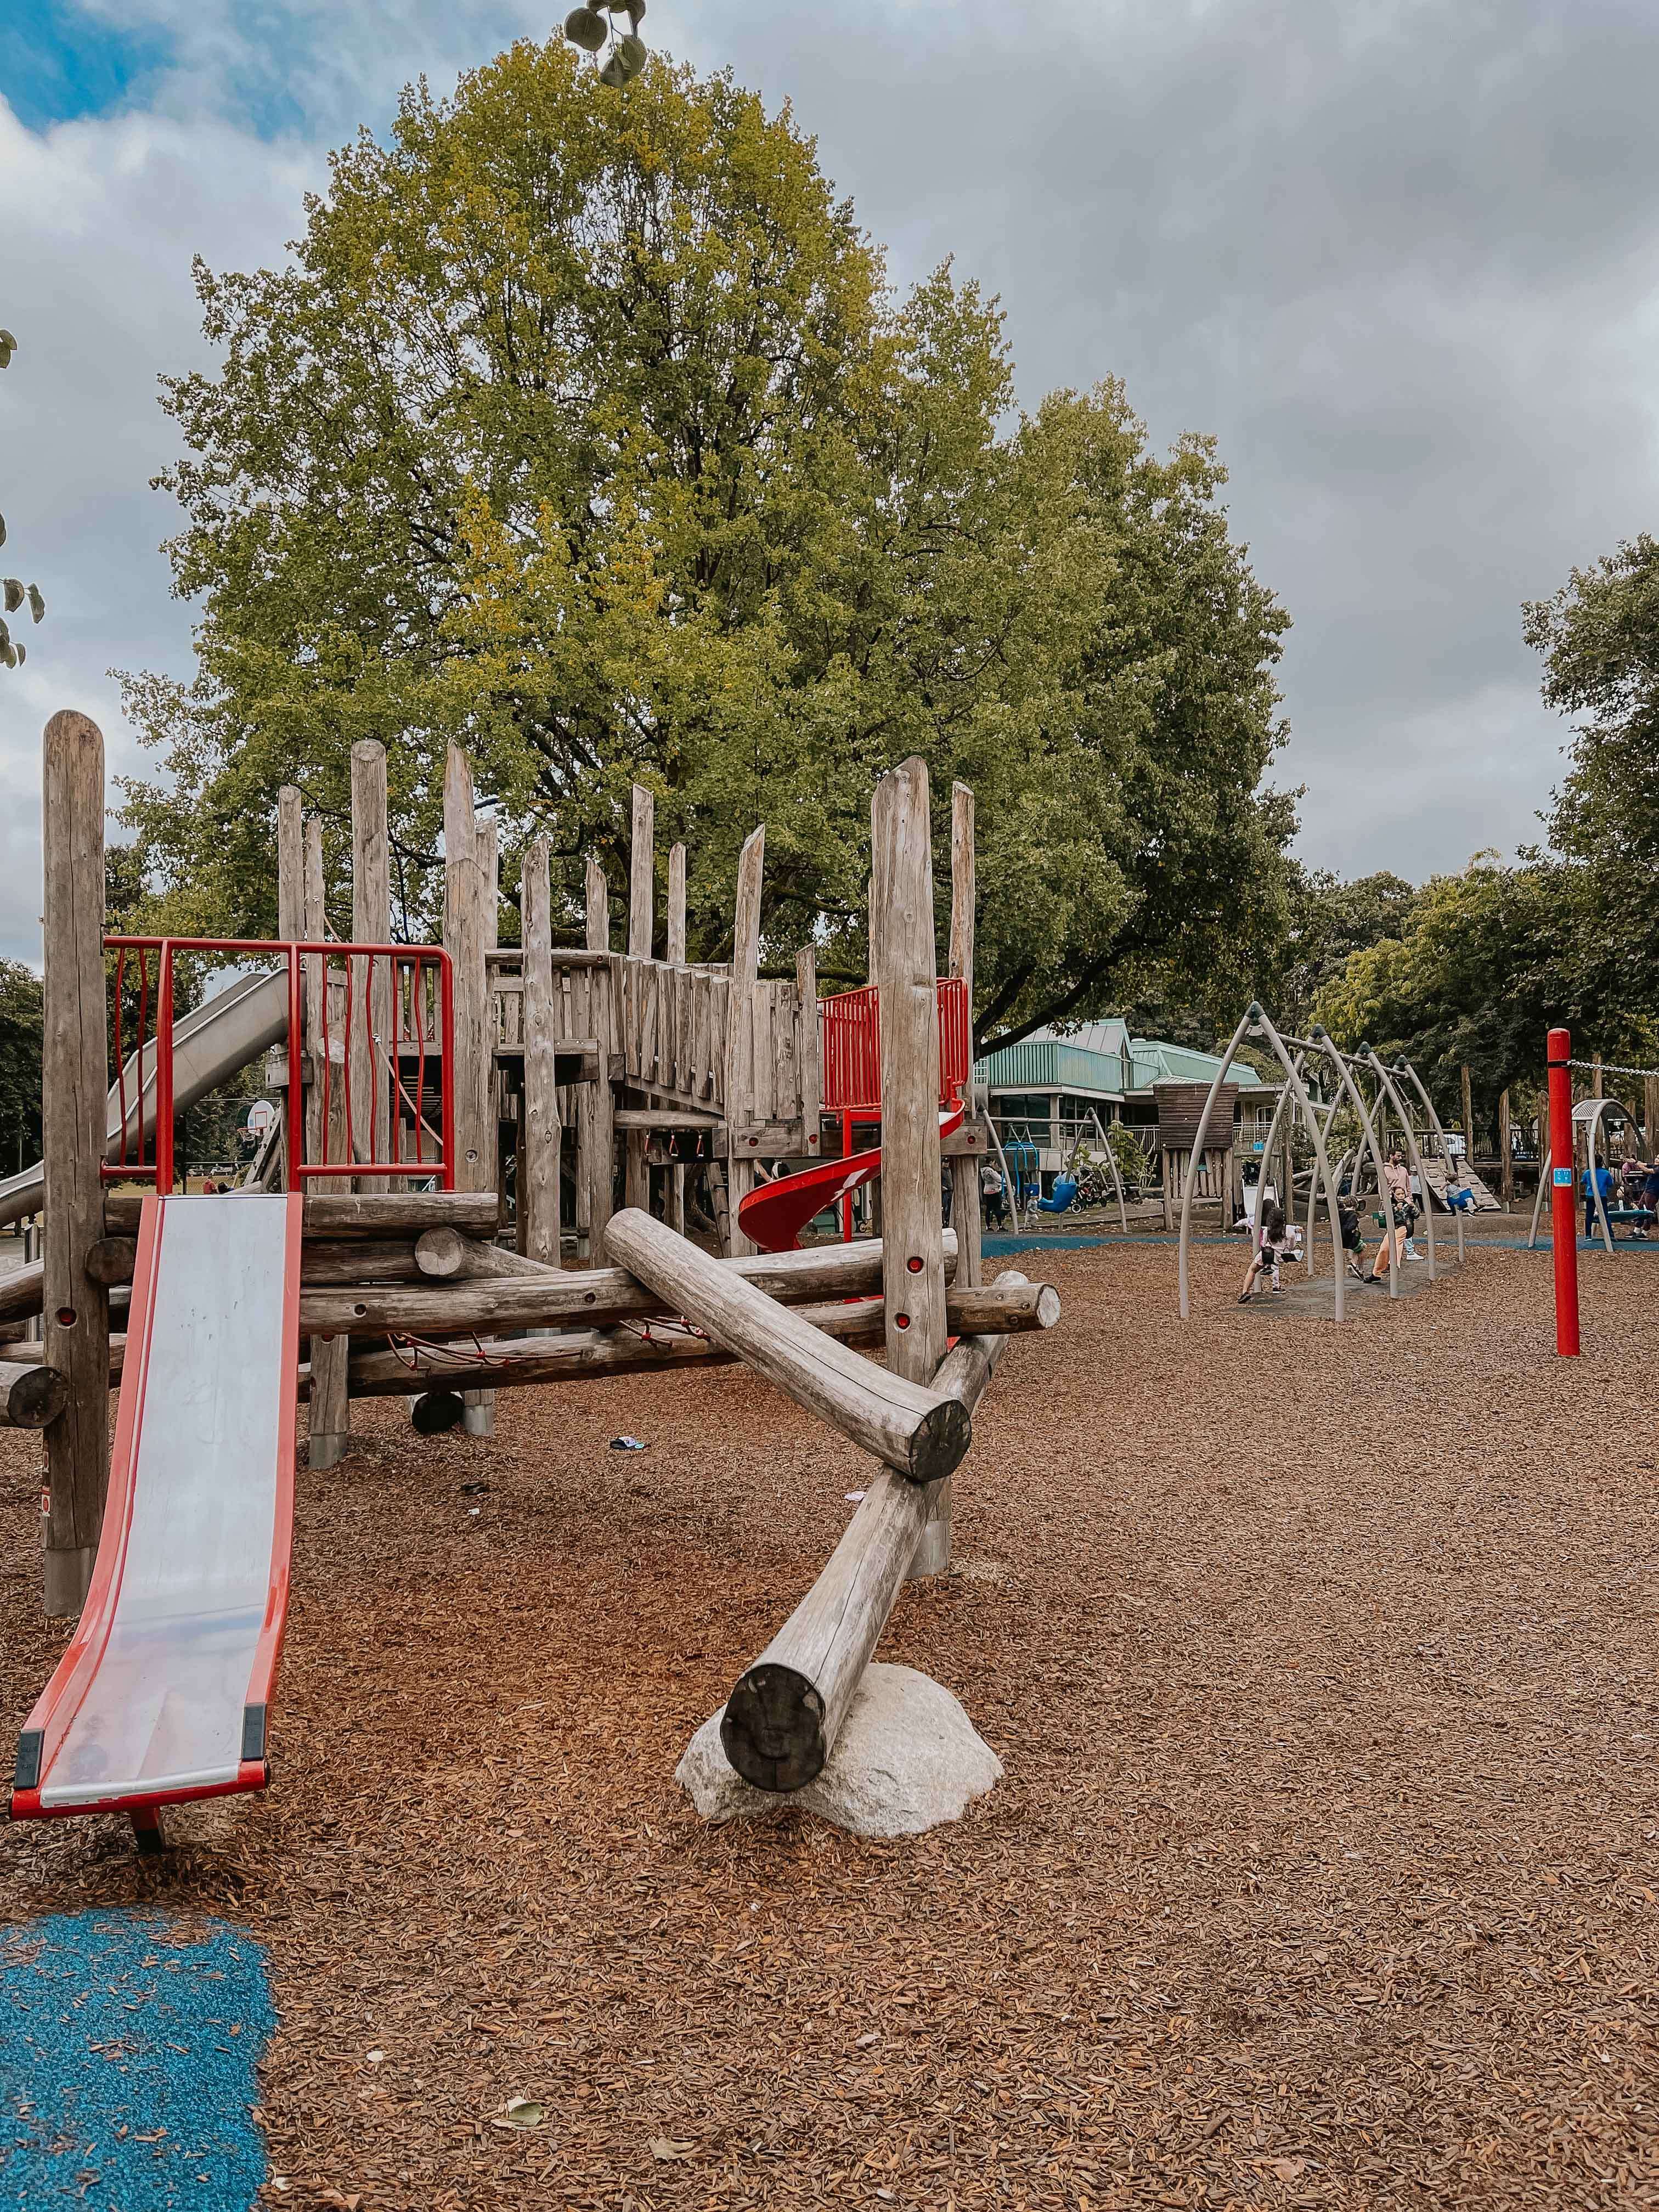 The Best Playgrounds for Kids in Vancouver